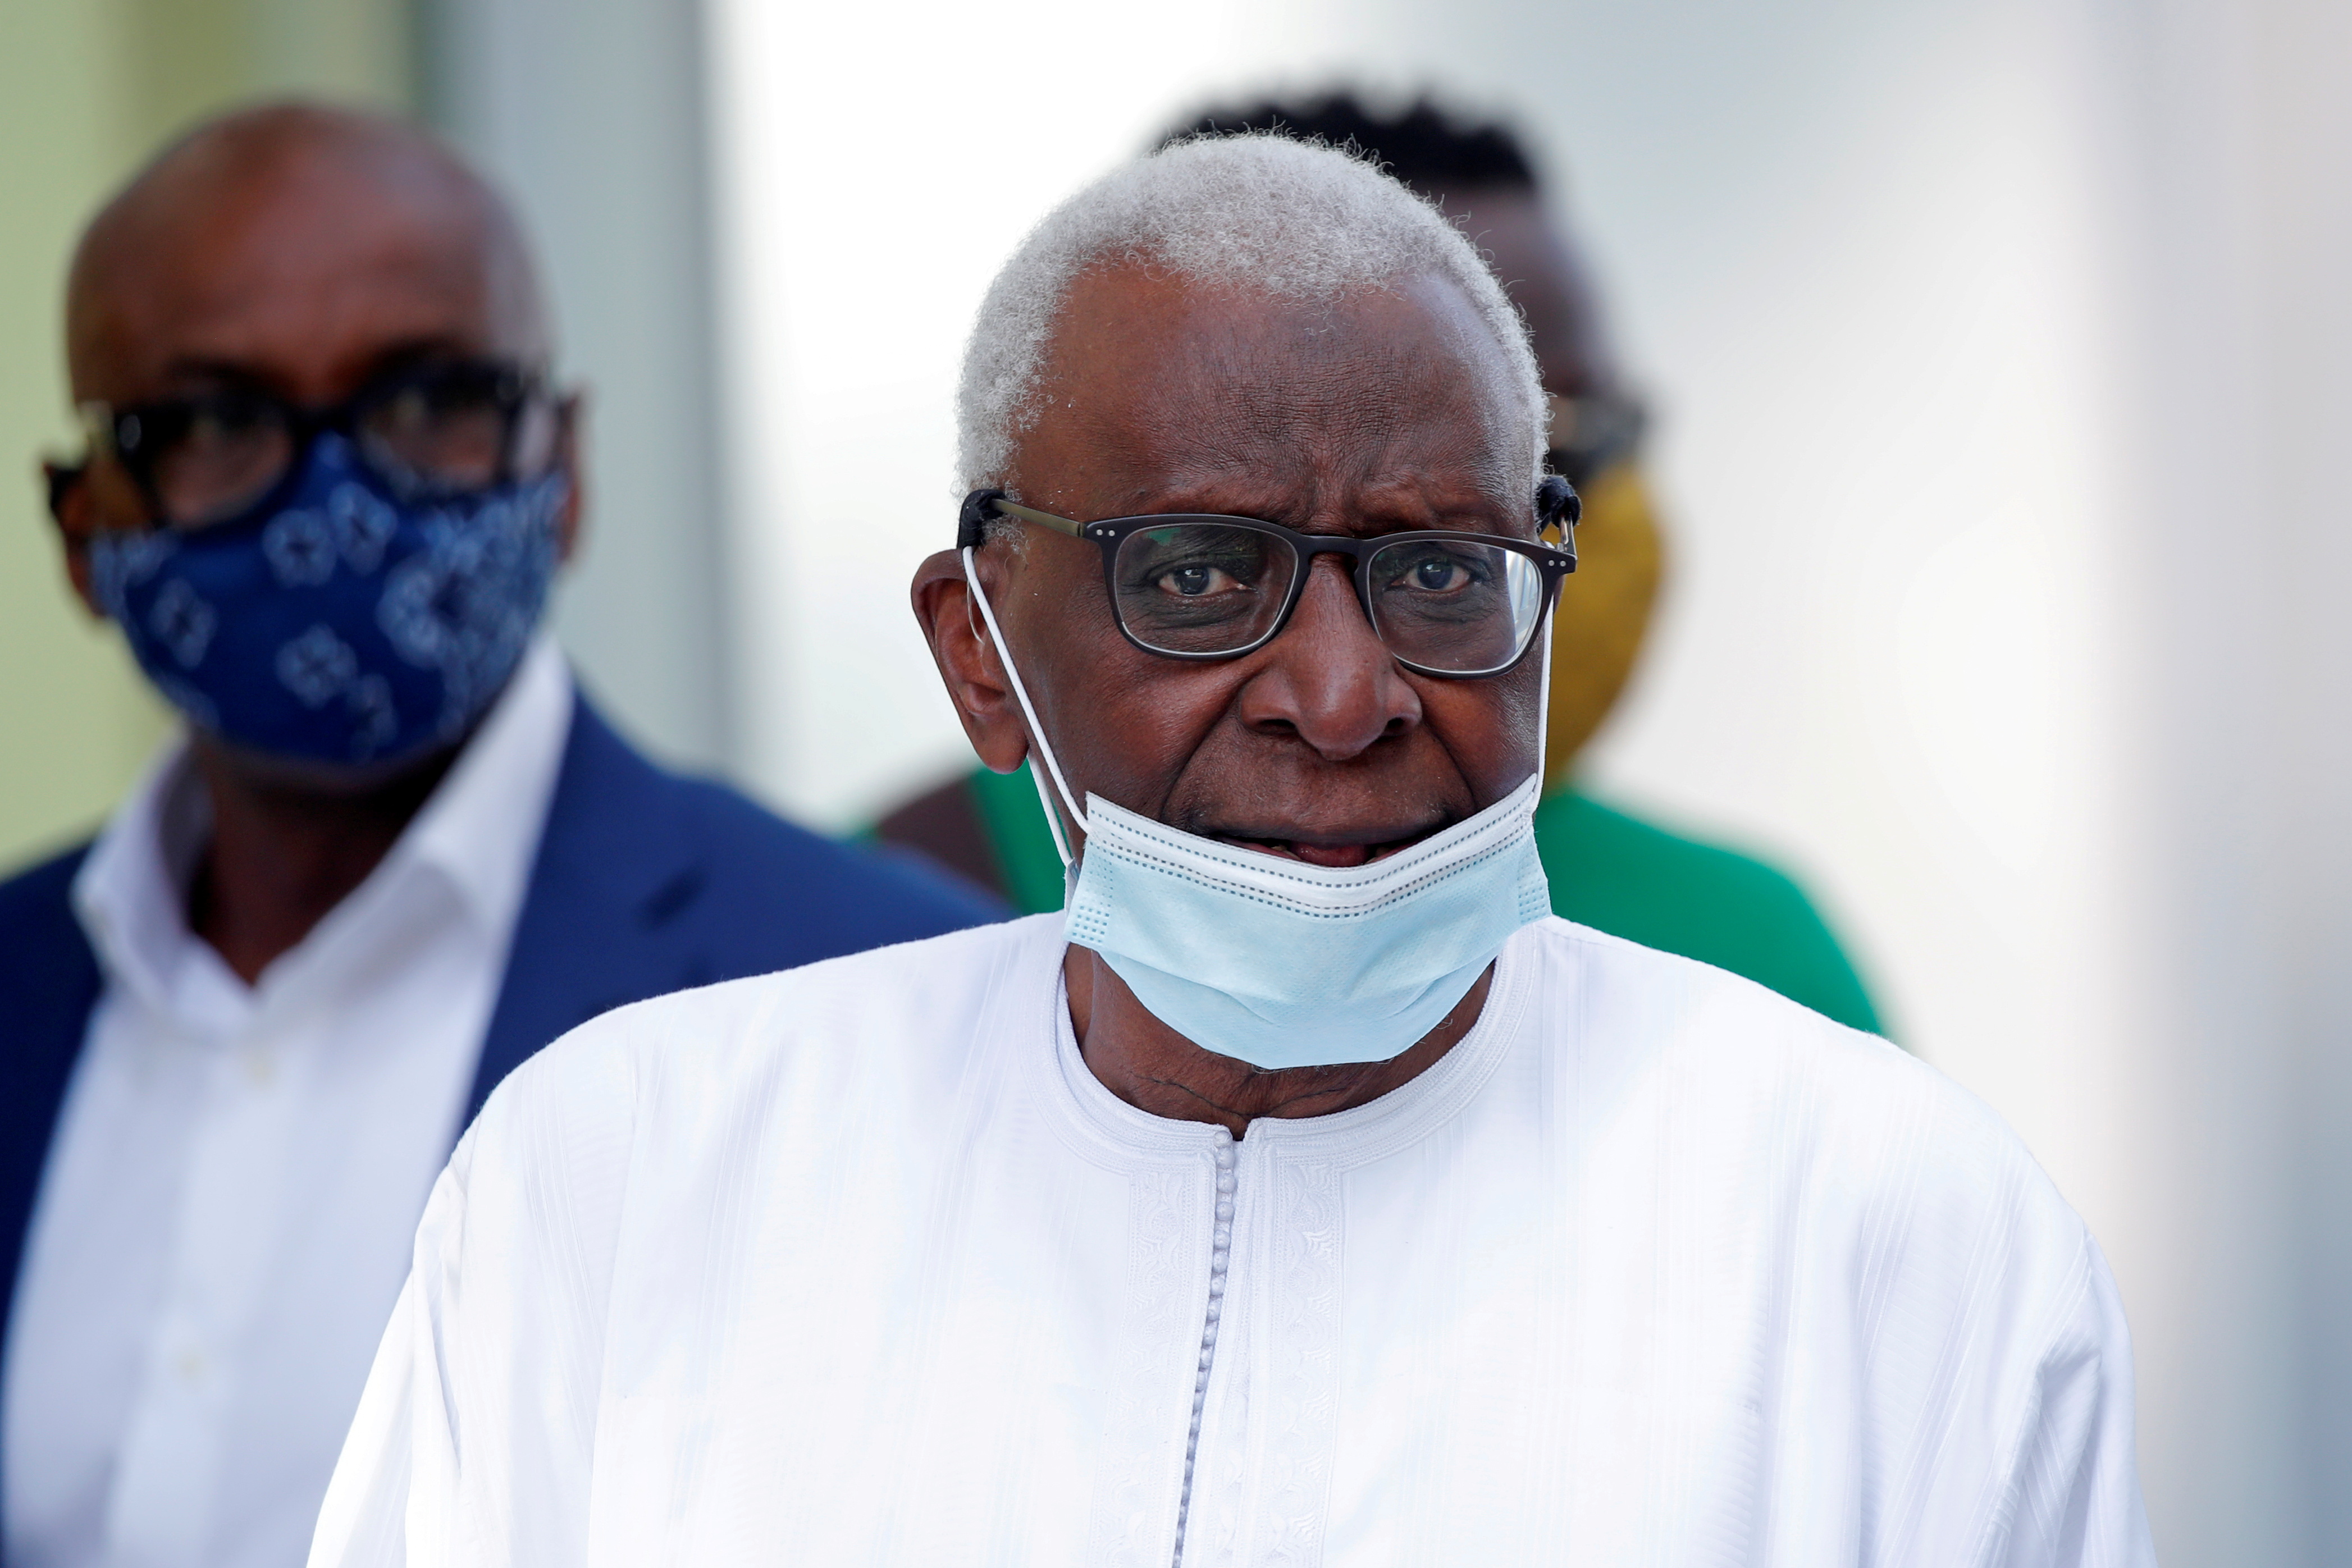   Former President of the International Association of Athletics Federations (IAAF) Lamine Diack, wearing a face mask, leaves after the verdict in his trial at the Paris courthouse, France, September 16, 2020. REUTERS/Charles Platiau/File Photo